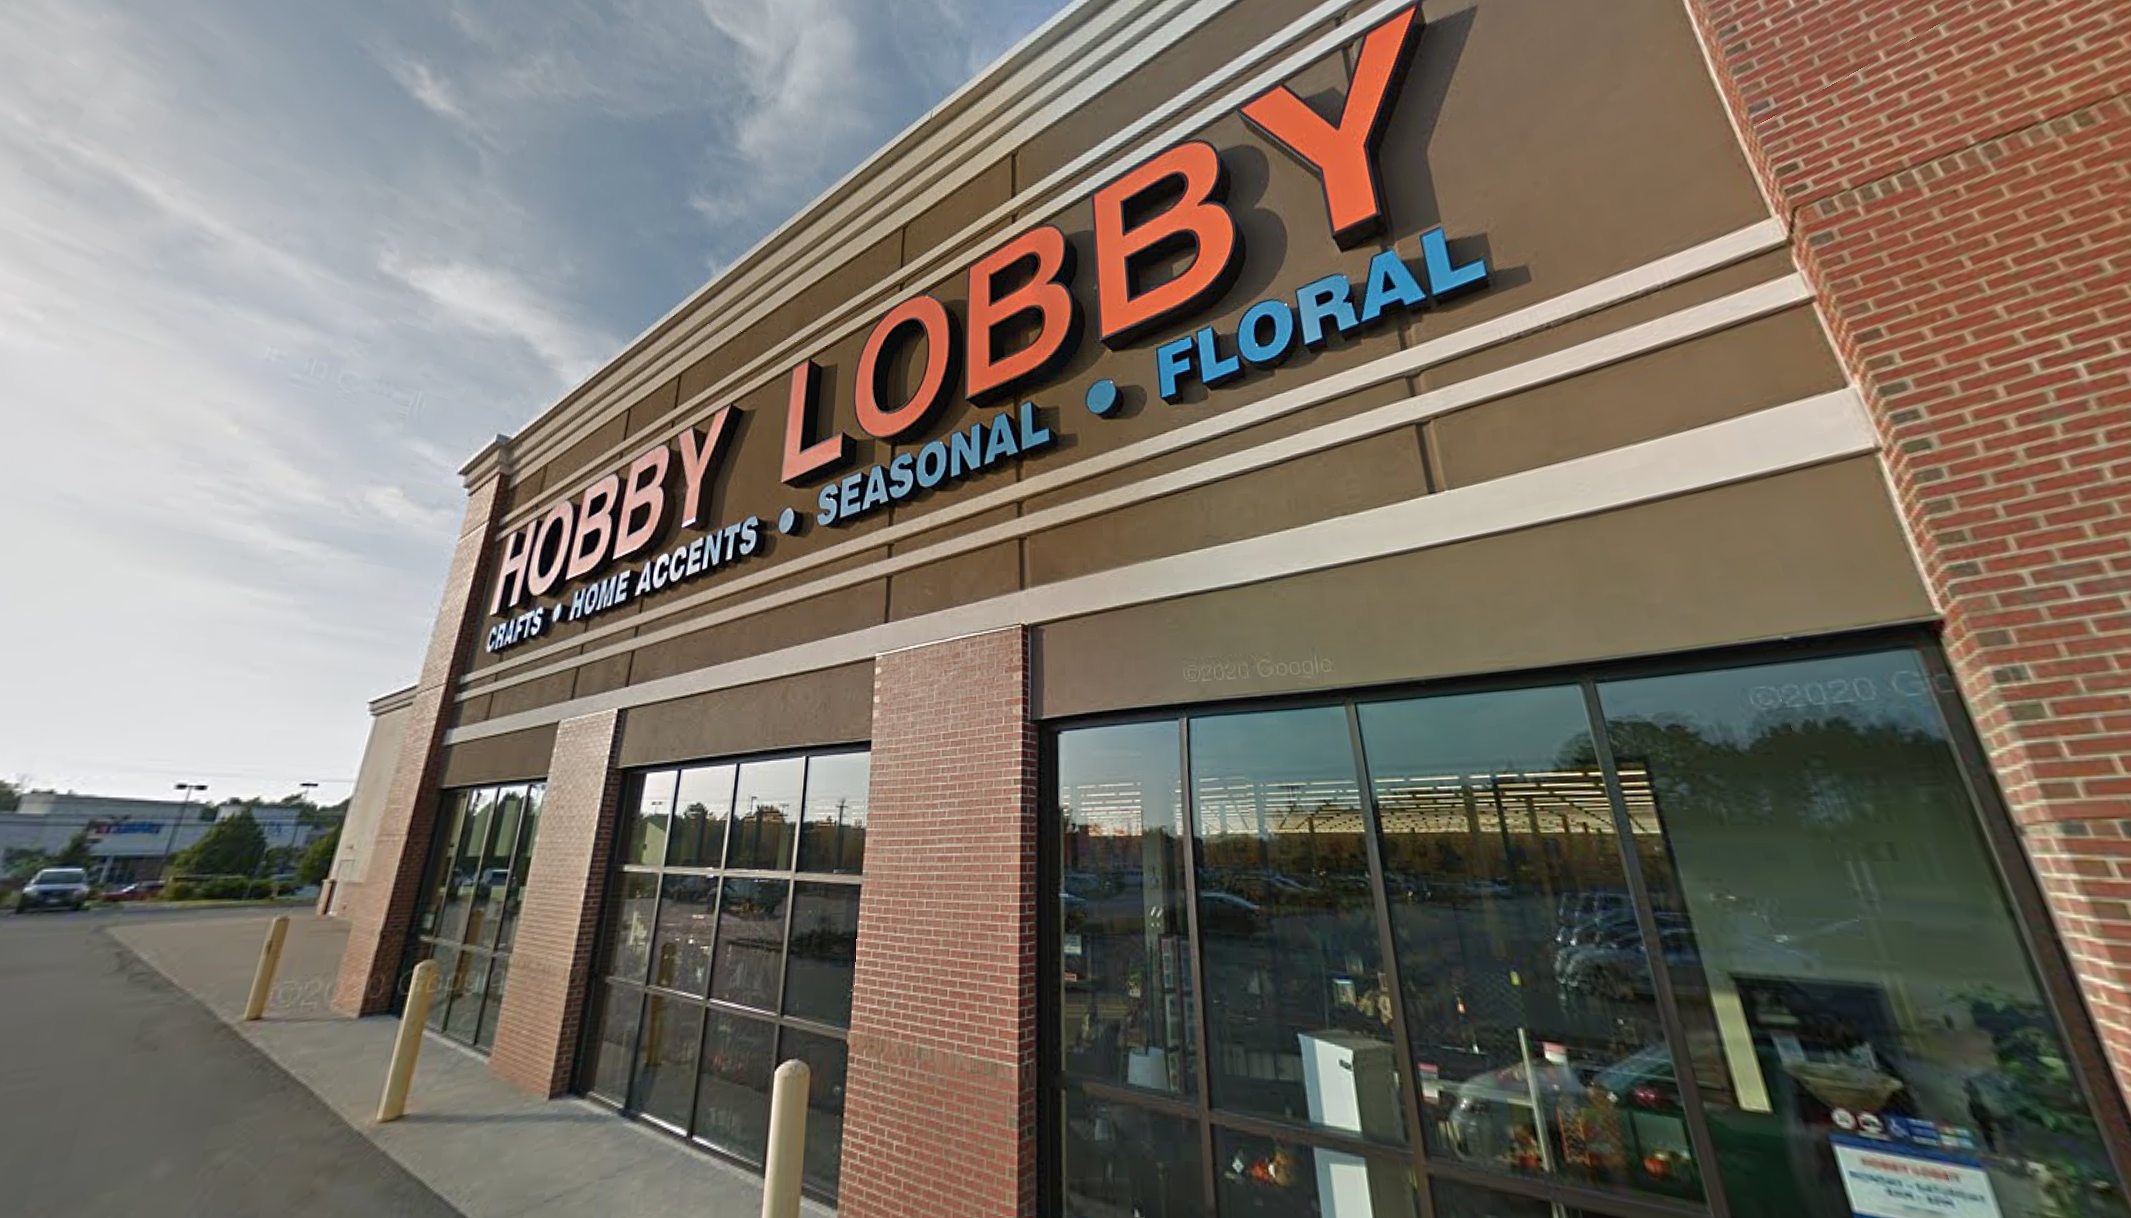 hobby lobby app used at different stores